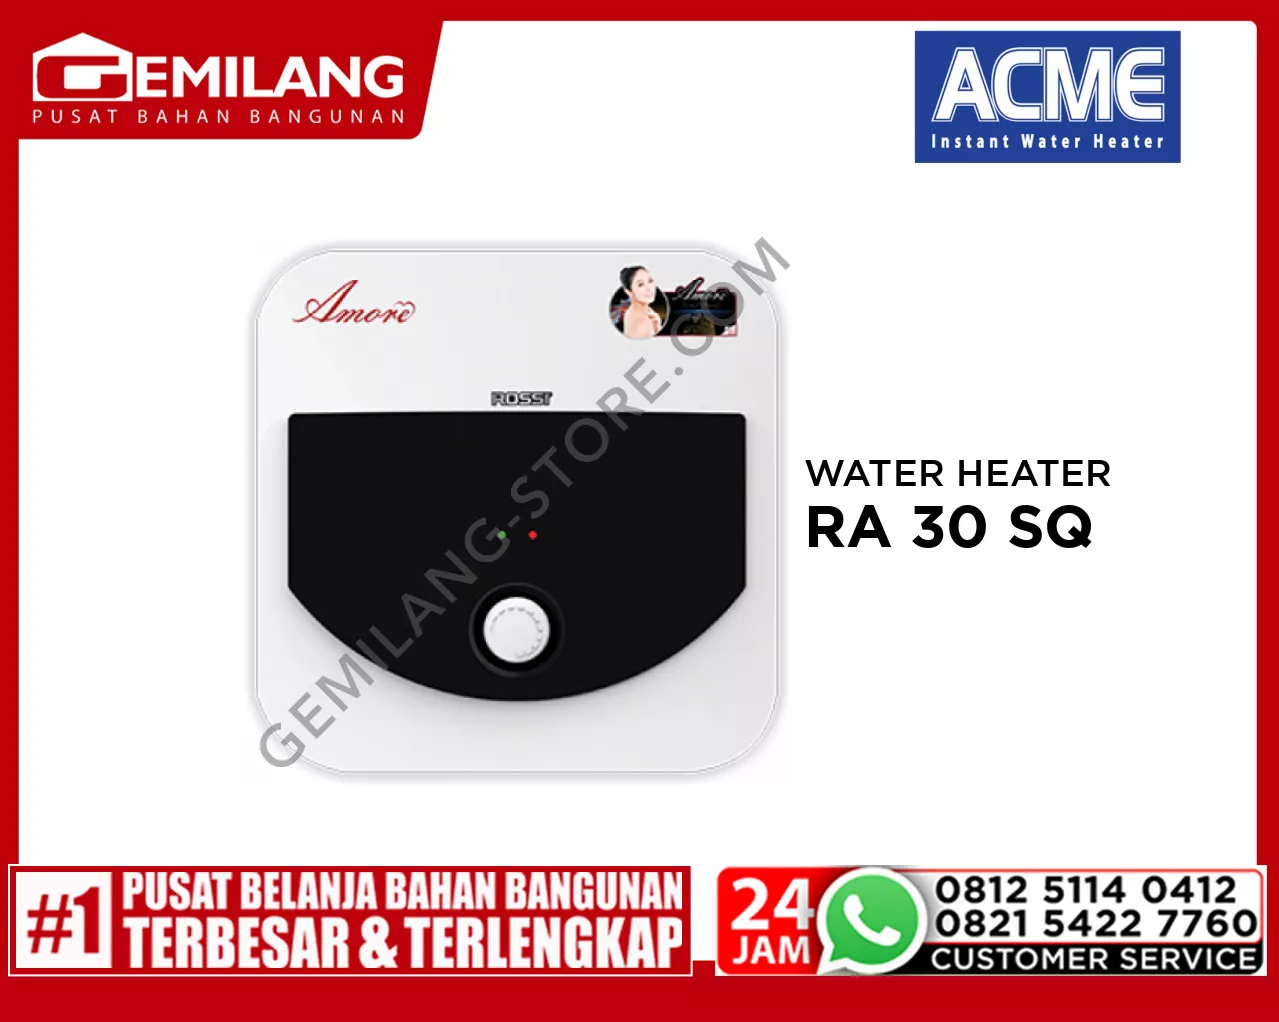 AMORE WATER HEATER RA 30 SQ